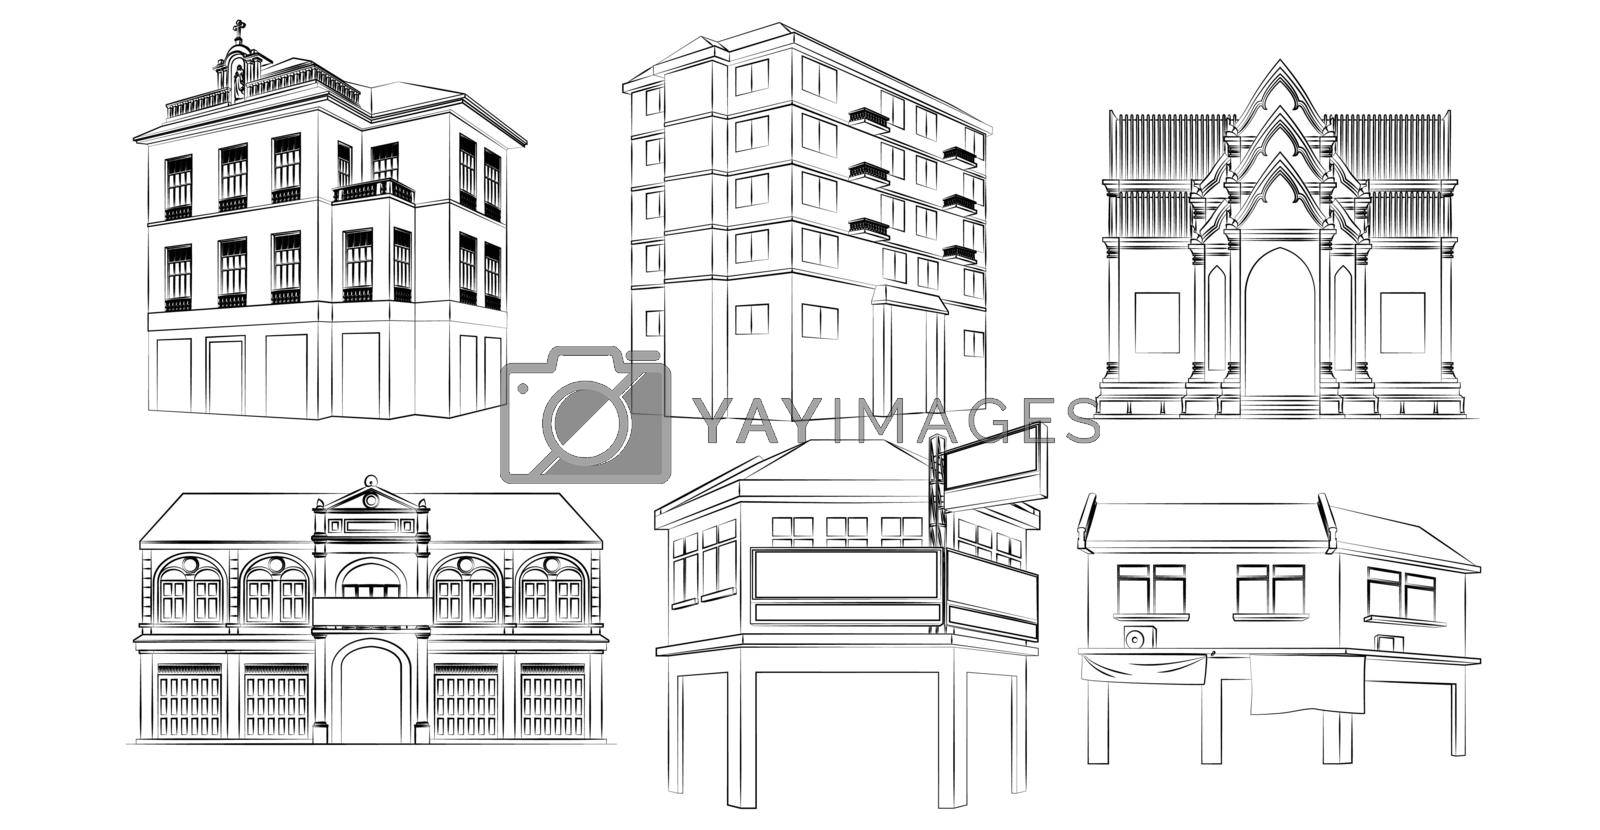 Royalty free image of doodle building line art cartoon by valueinvestor